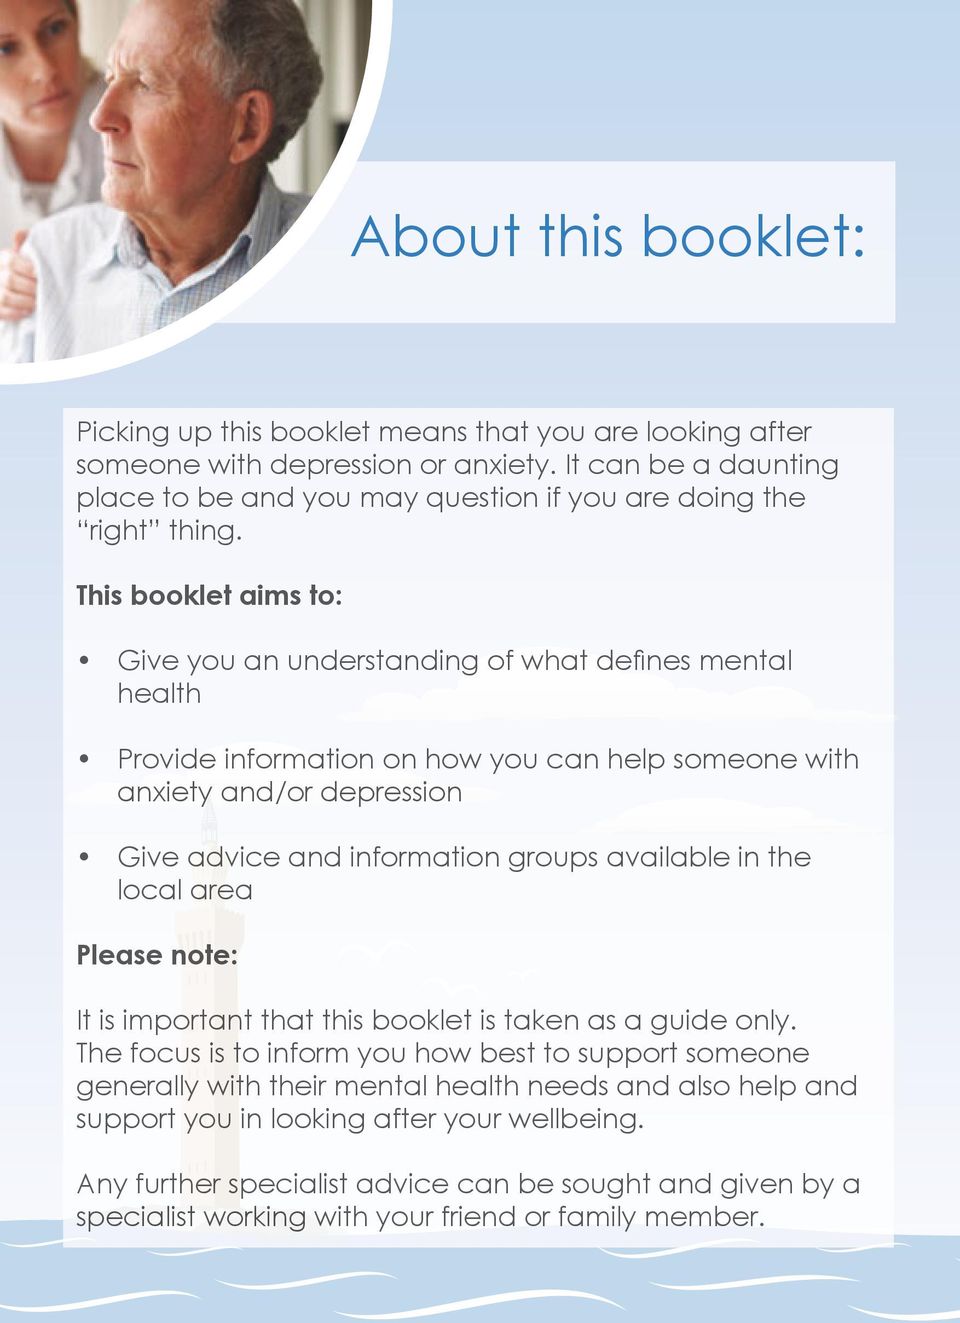 This booklet aims to: Give you an understanding of what defines mental health Provide information on how you can help someone with anxiety and/or depression Give advice and information groups